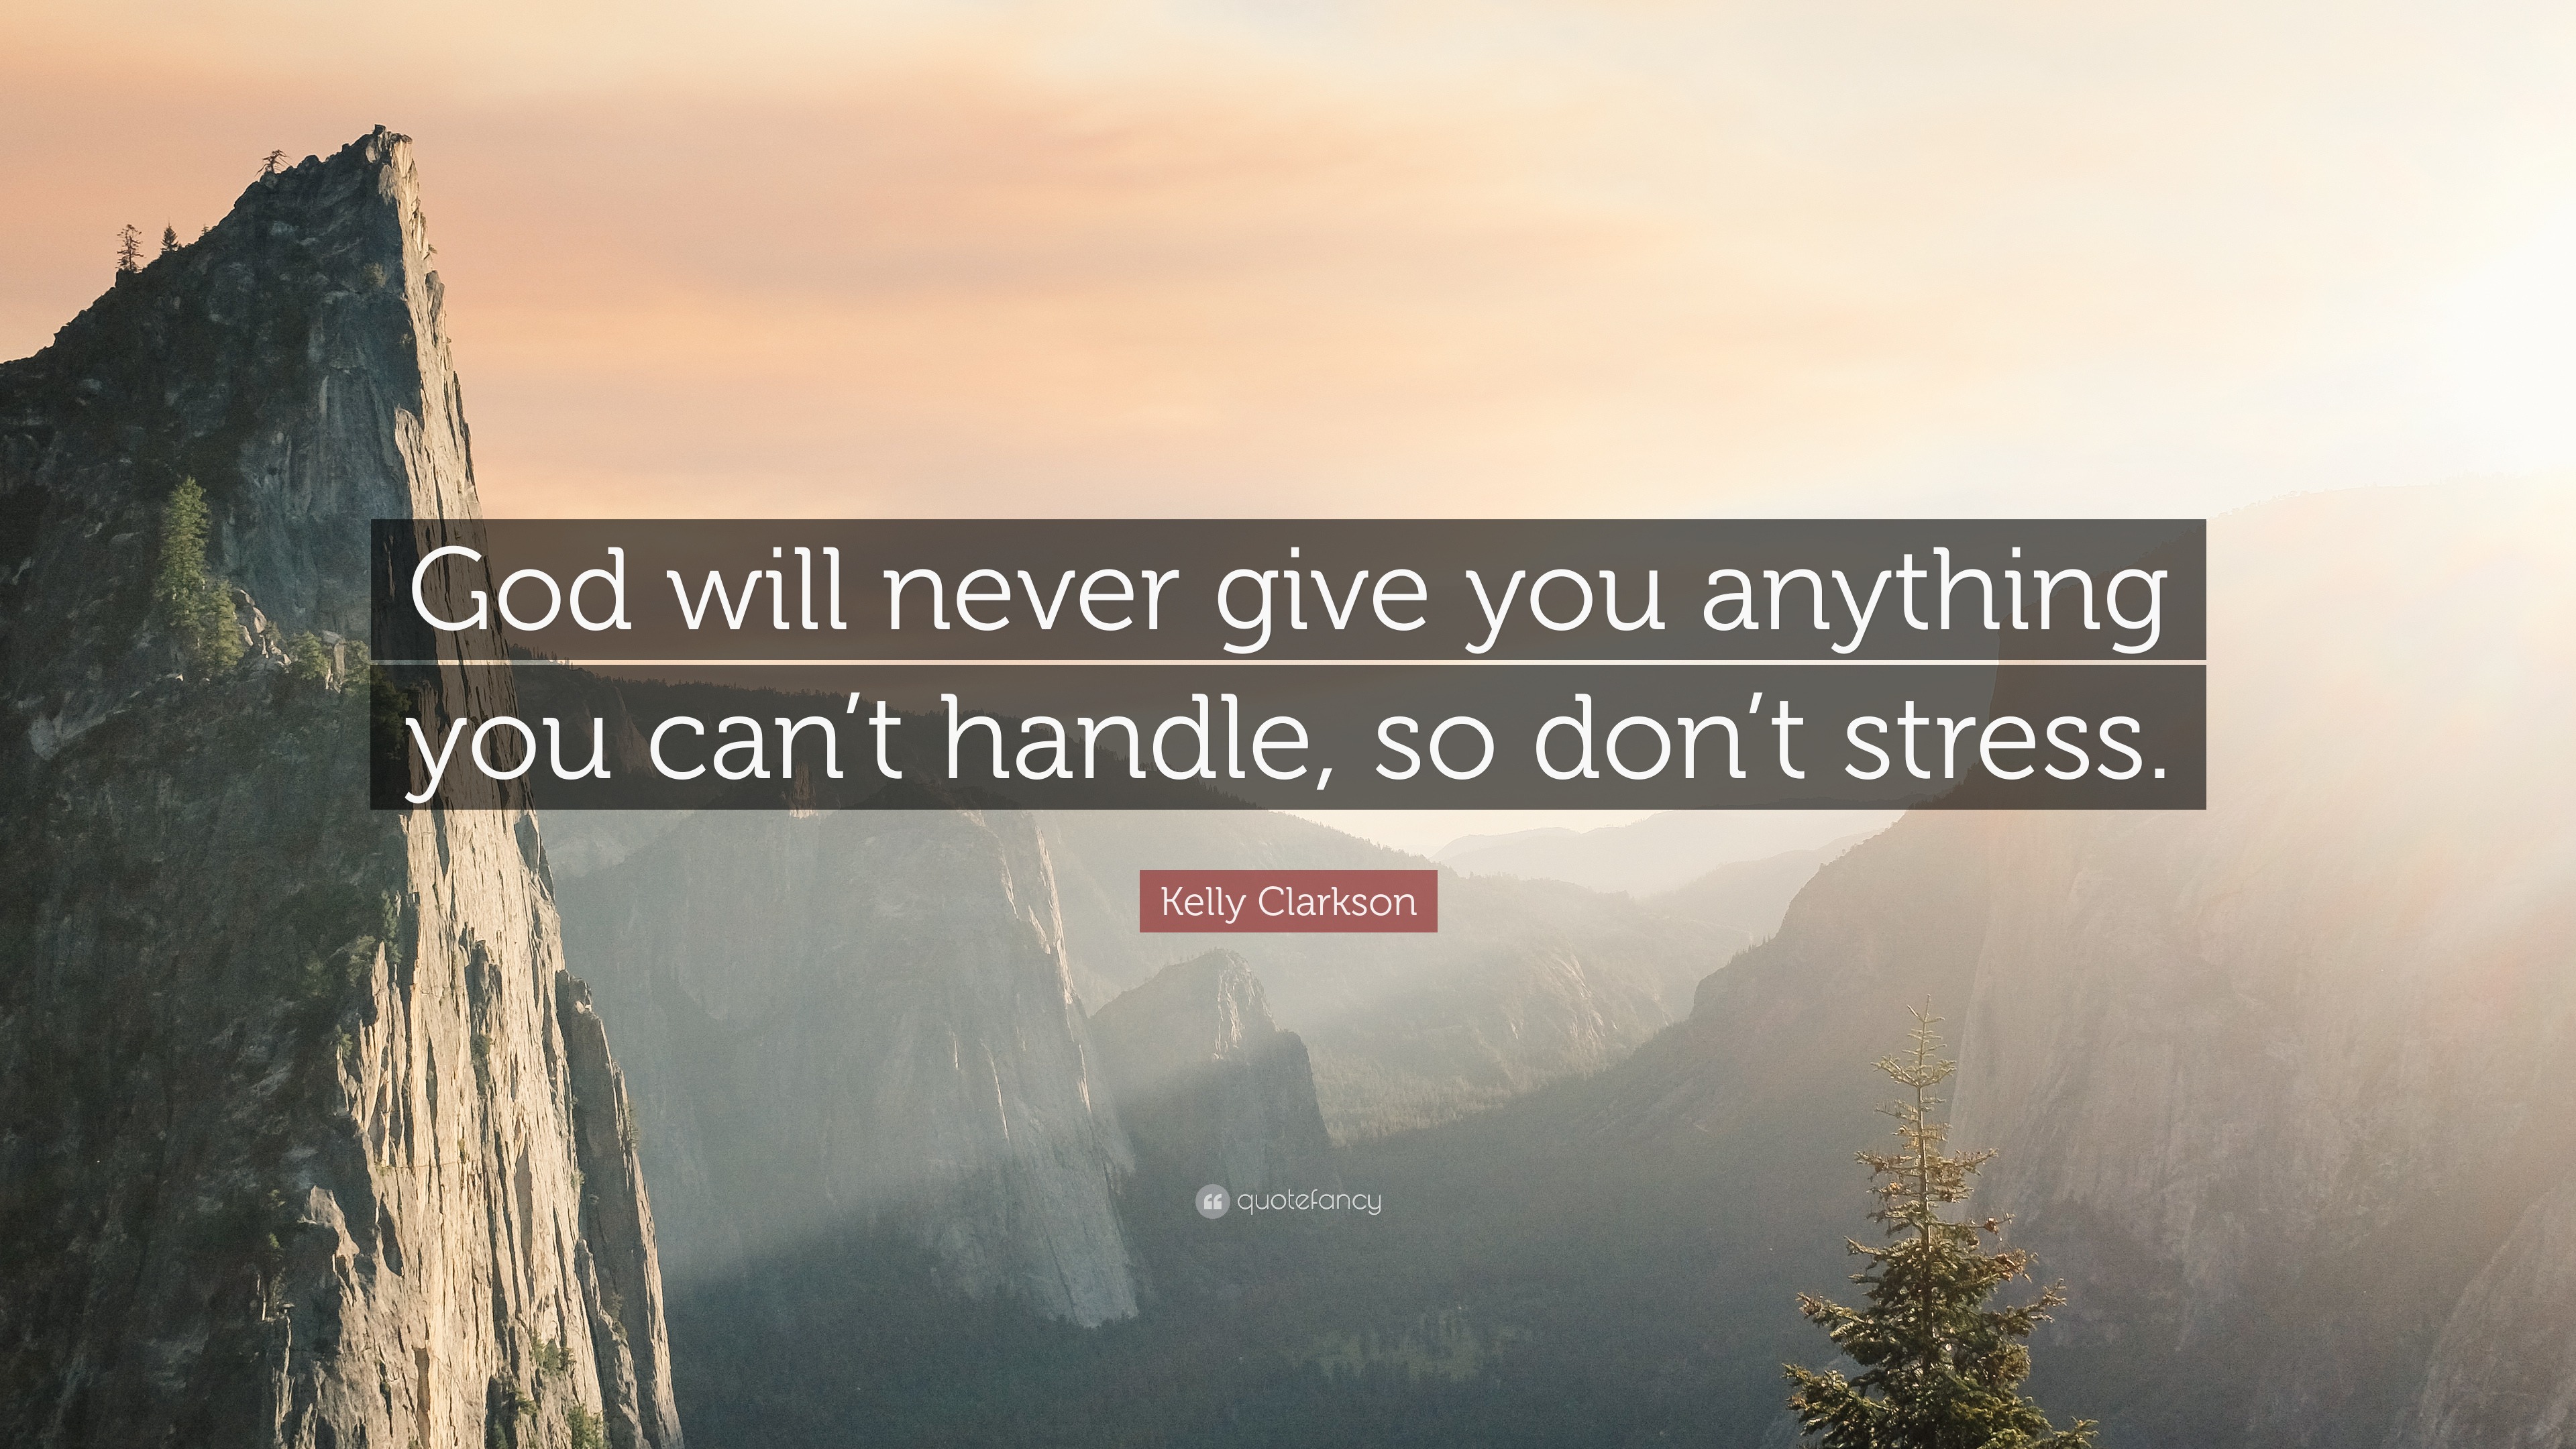 Kelly Clarkson Quote: "God will never give you anything you can't handle, so don't stress."